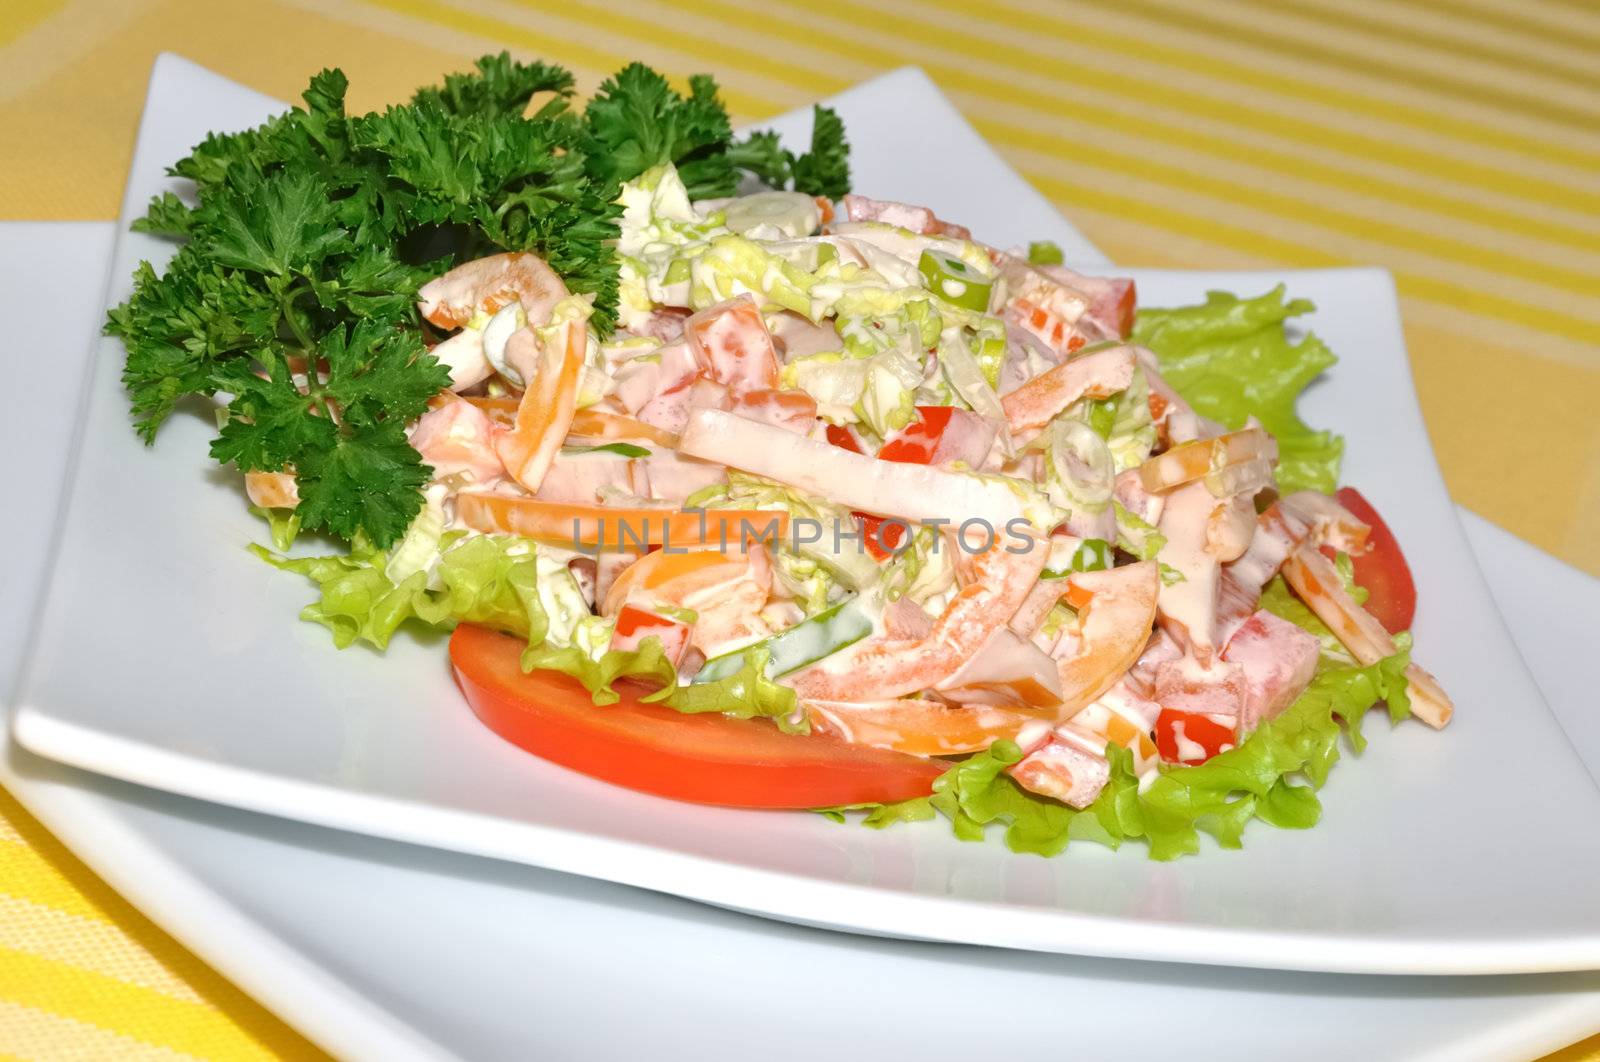 Salad with red pepper, tomato, chicken mayonnaise